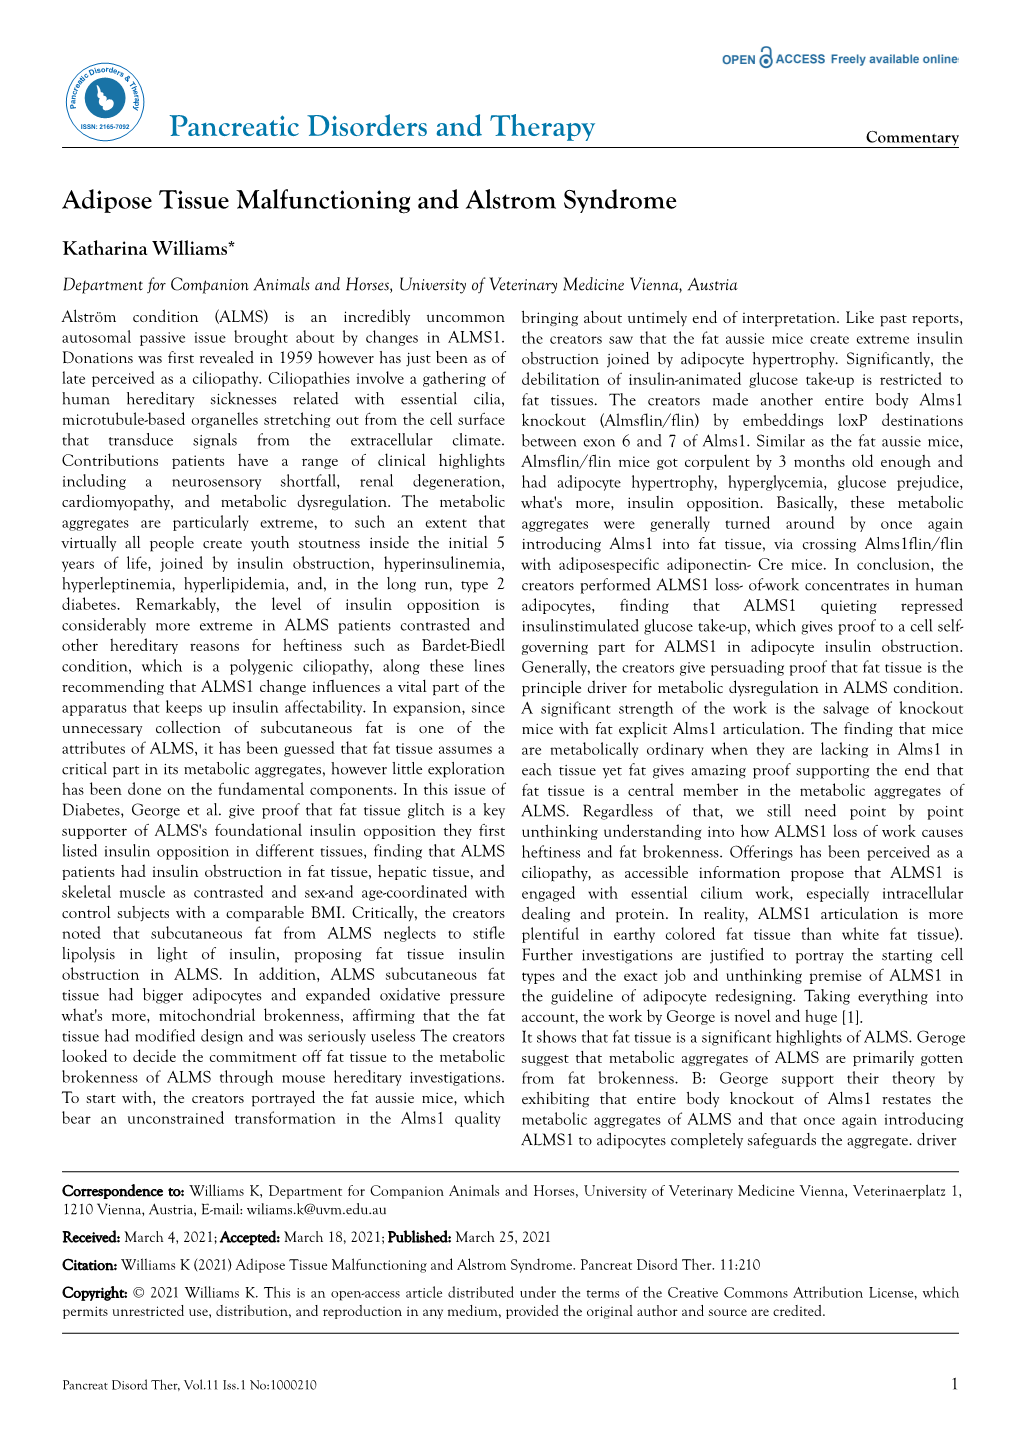 Adipose Tissue Malfunctioning and Alstrom Syndrome